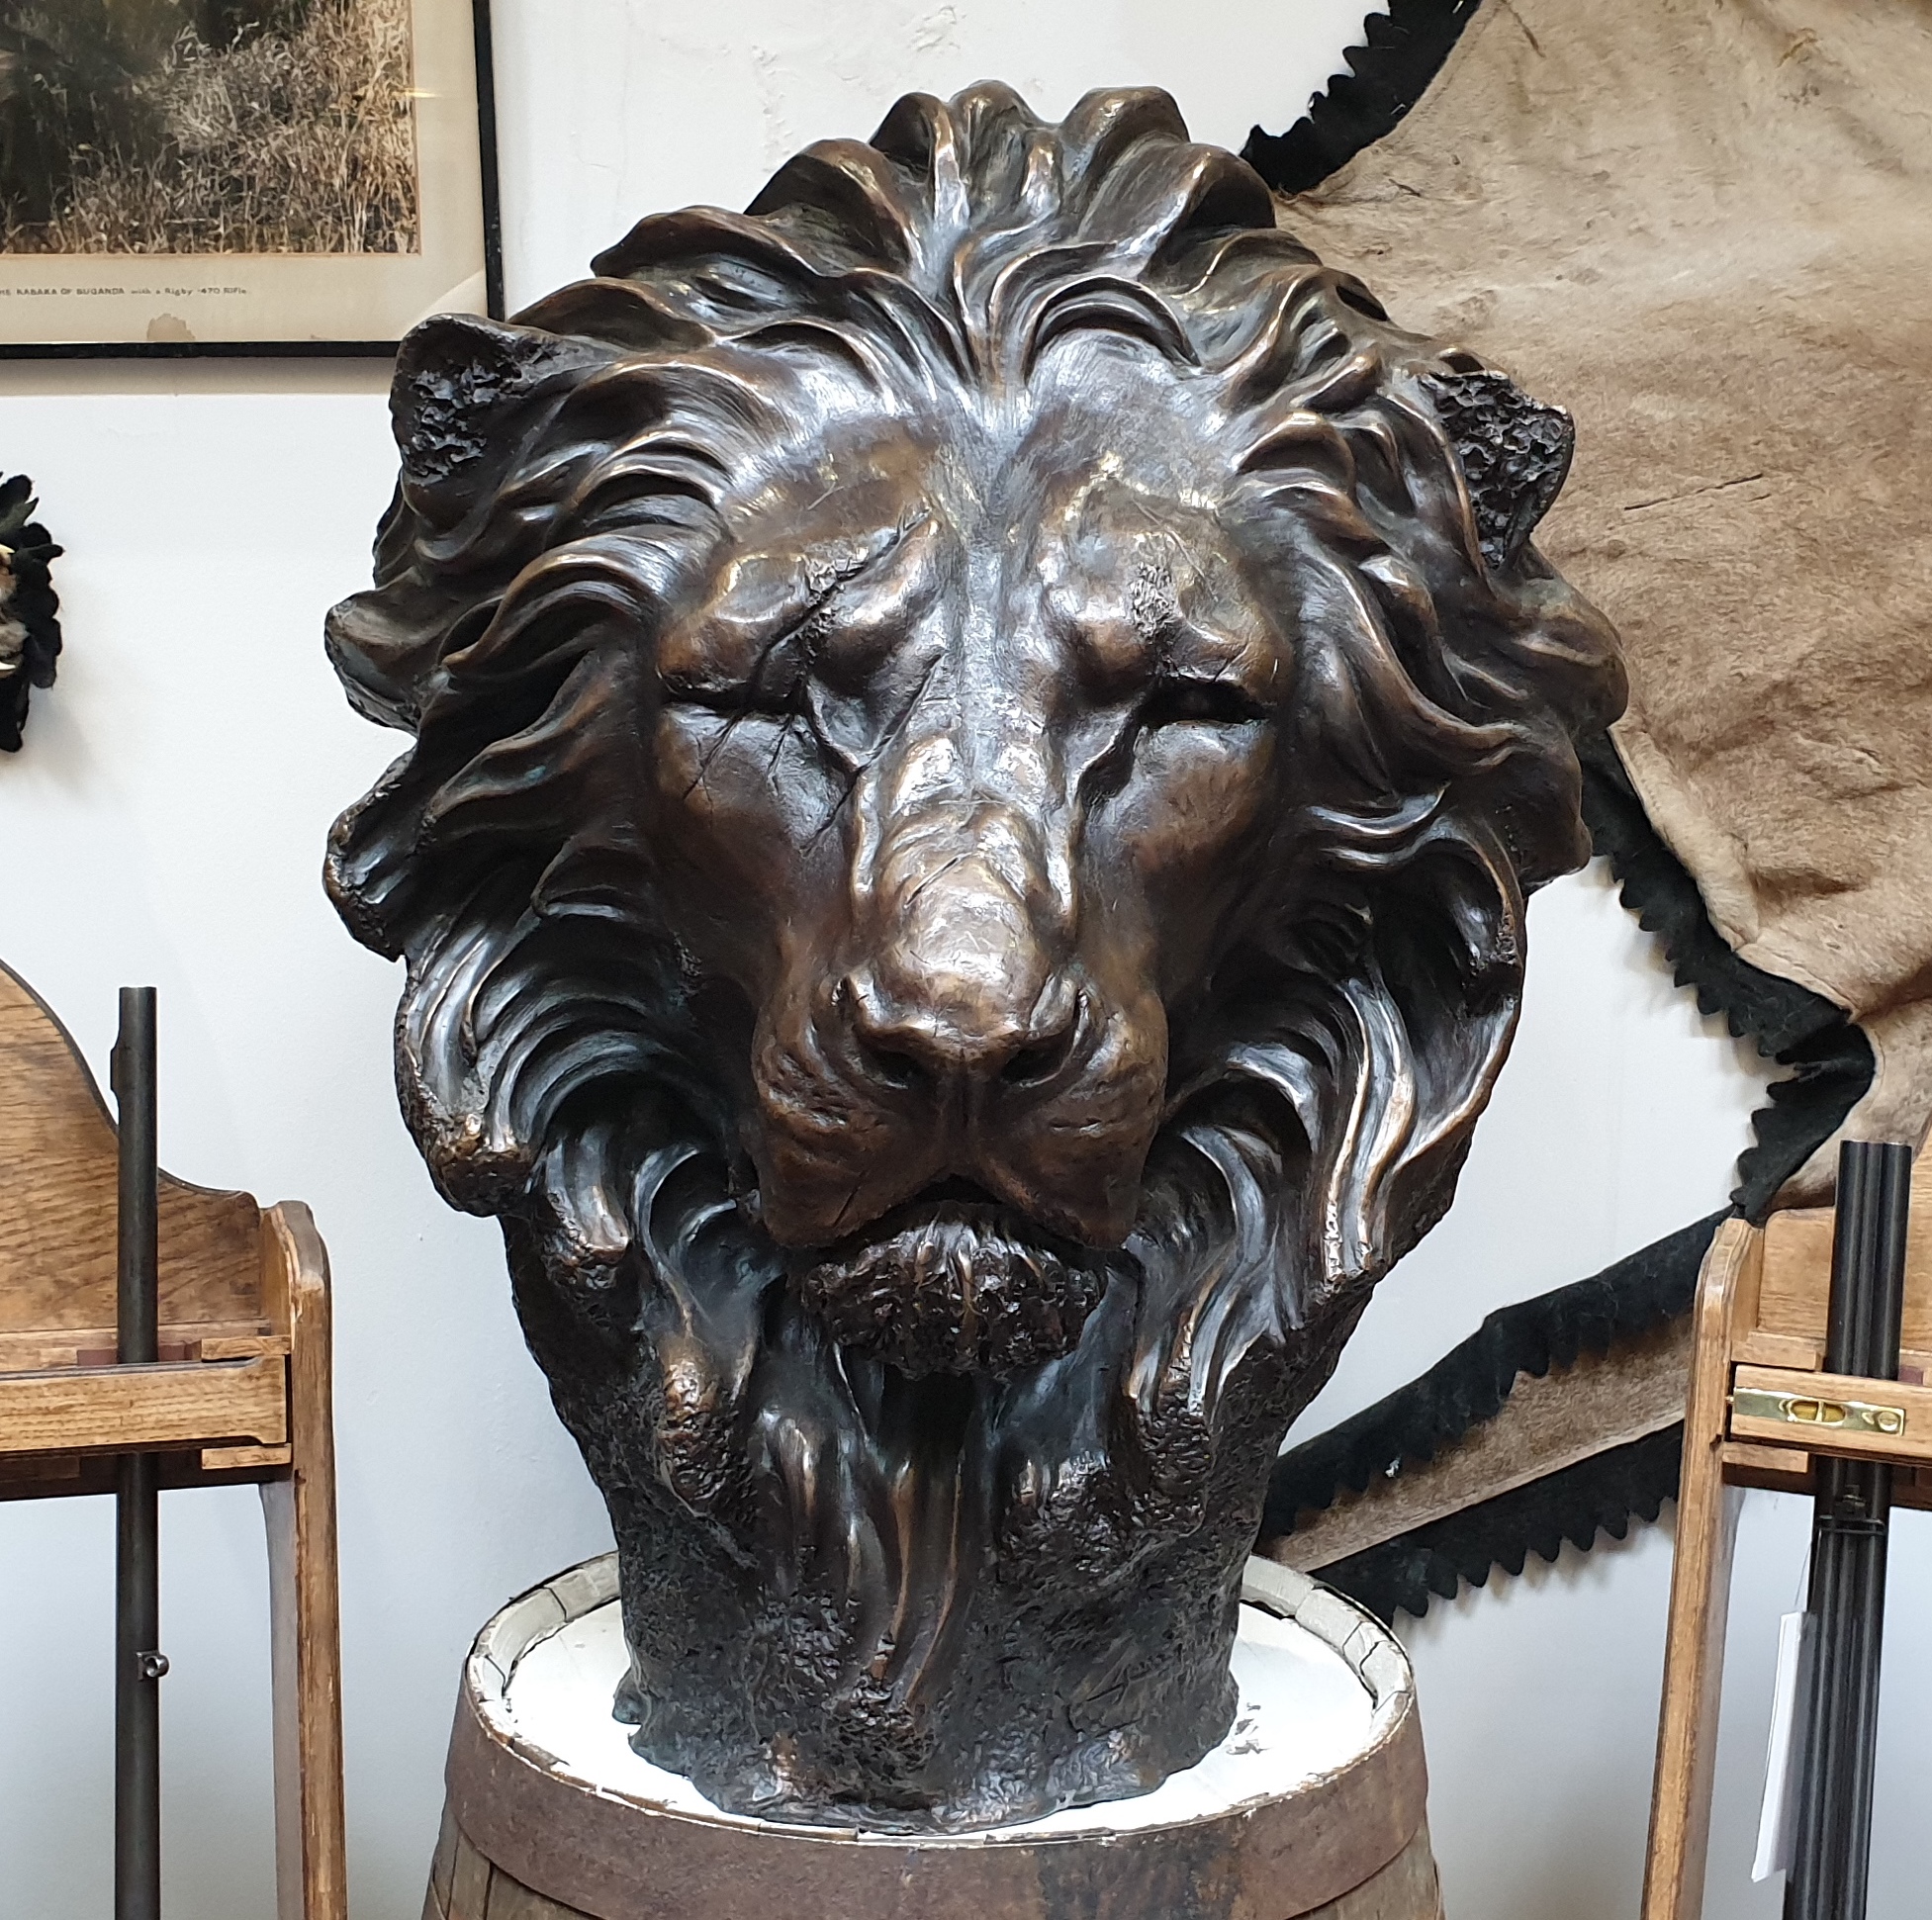 The price of the reign” Limited edition bronze sculpture - John